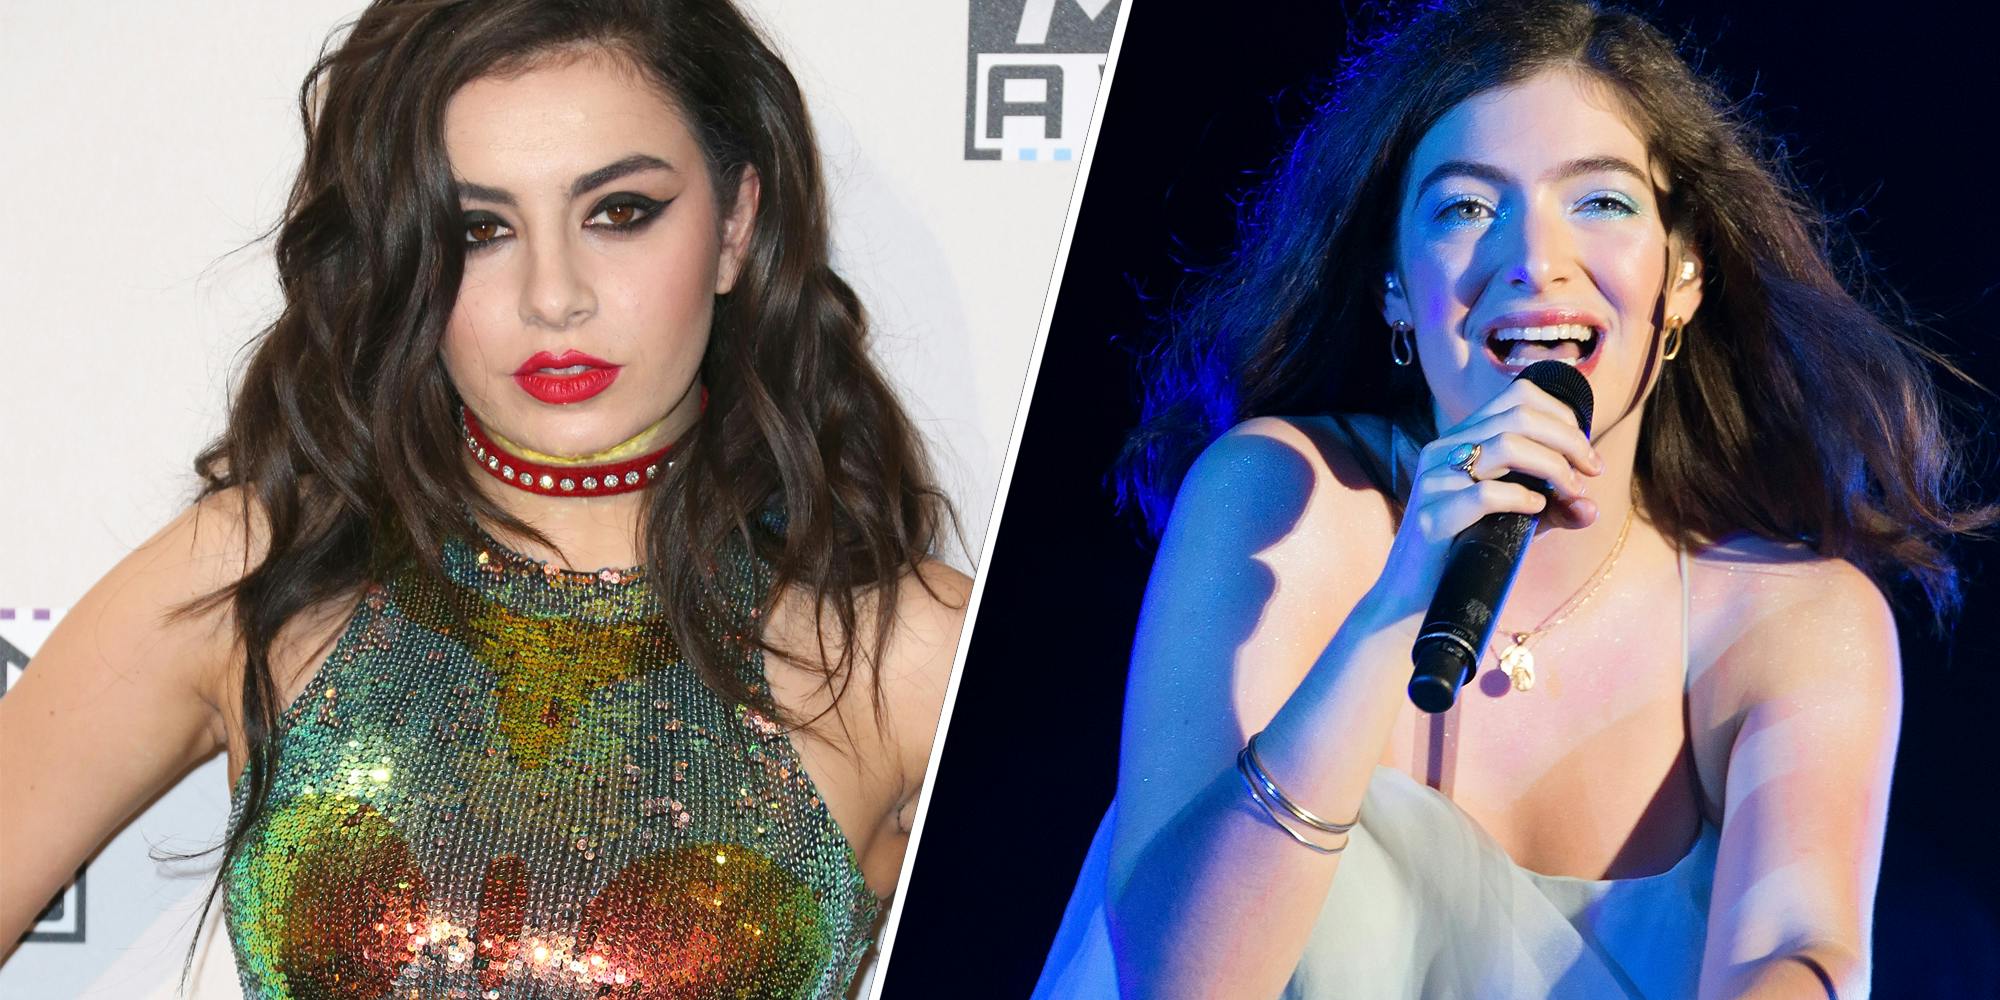 Charil XCX(l), Lorde(r)